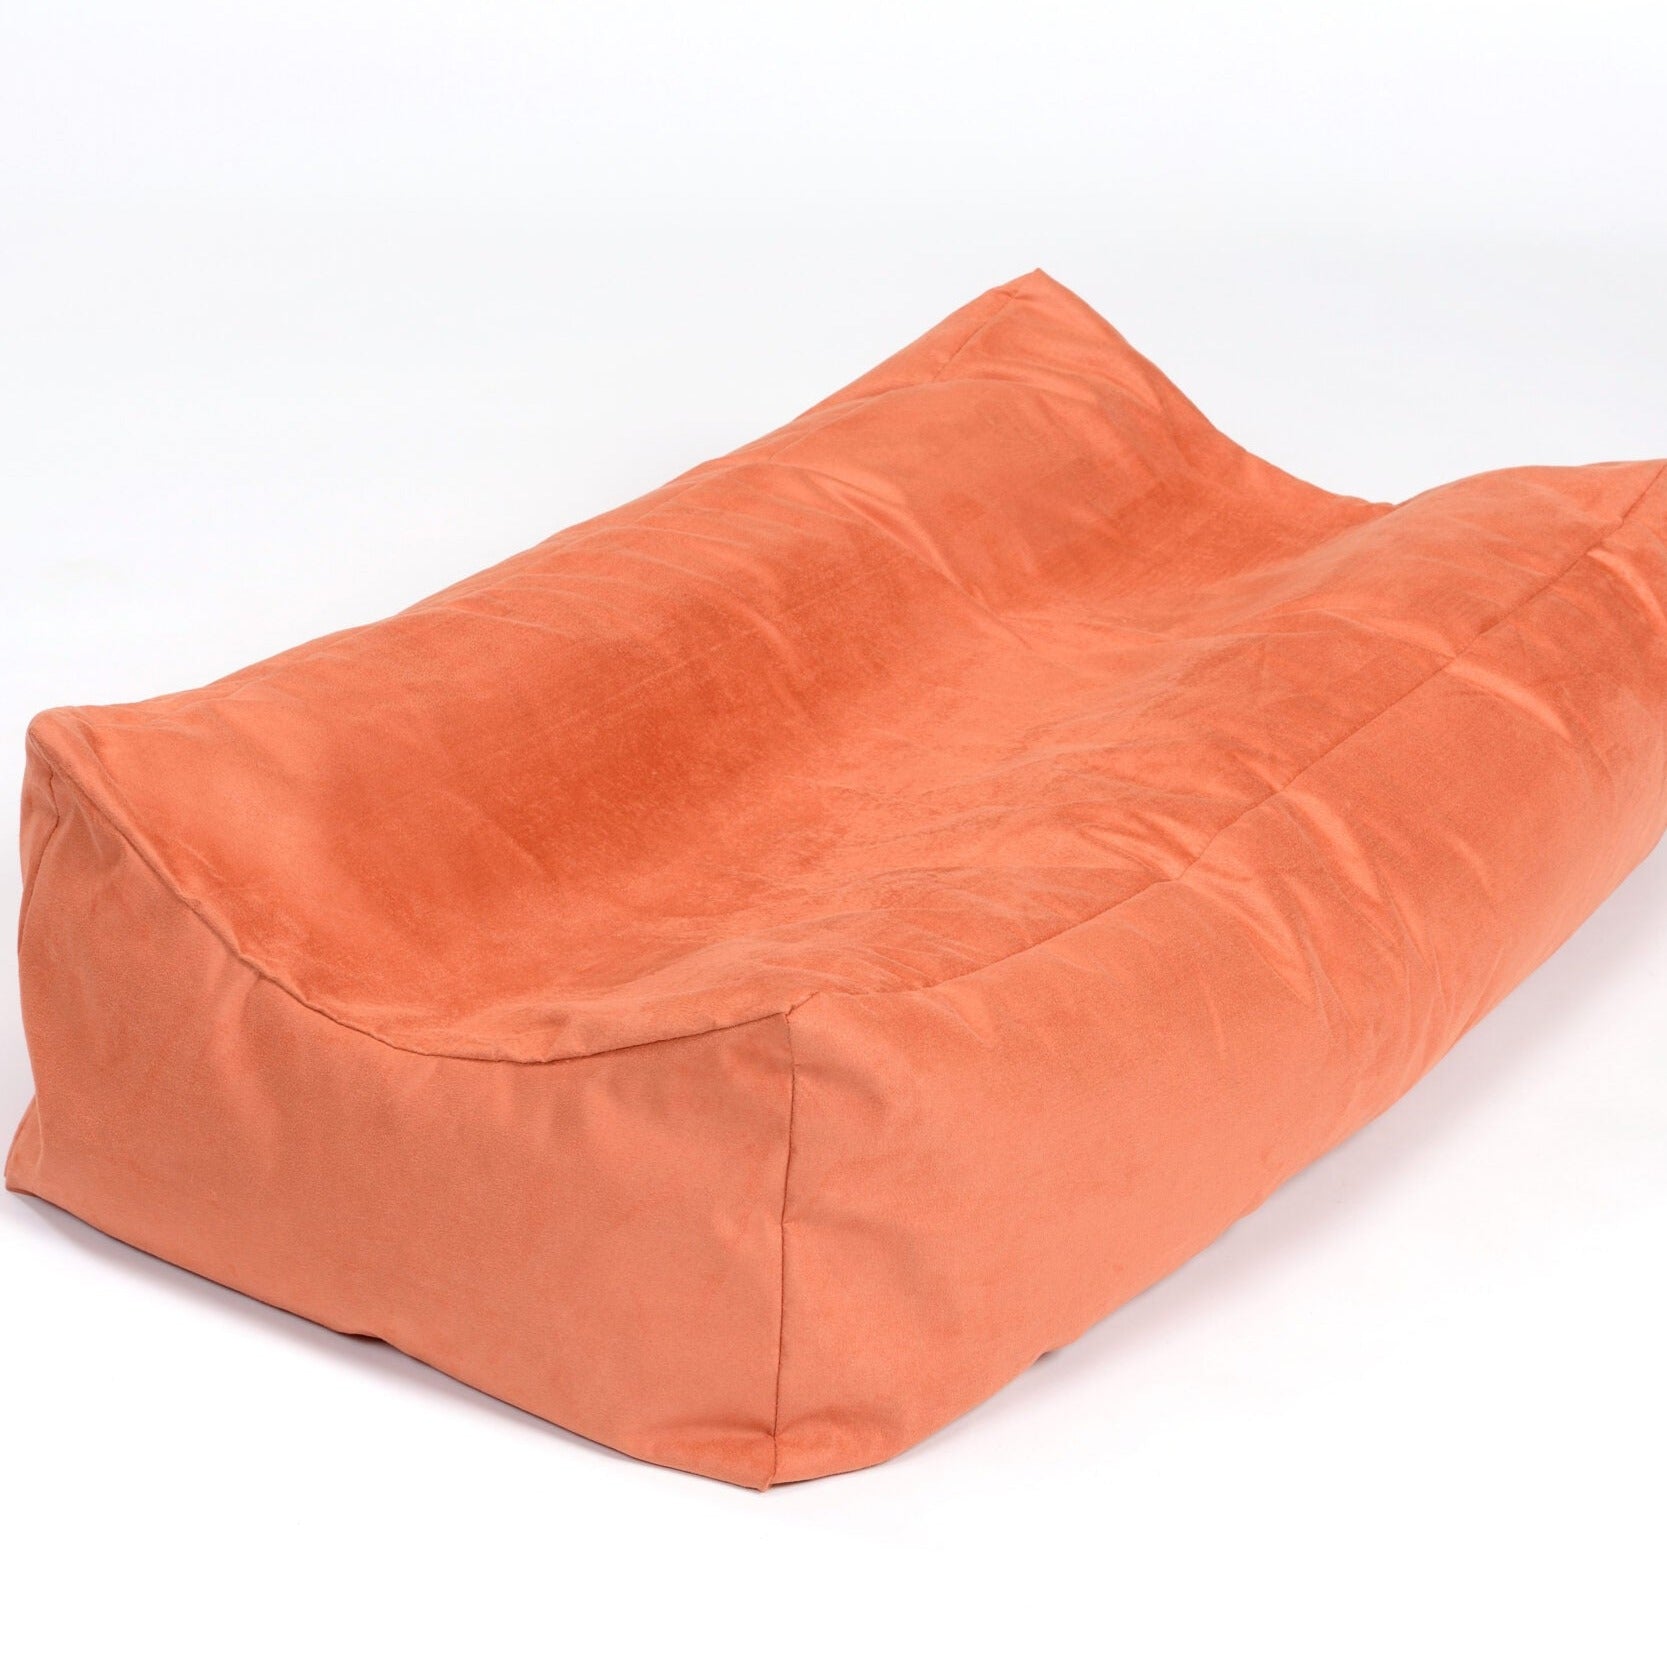 Squidgy Body Support Beanbag, The Squidgy Body Support Beanbag is a versatile and comfortable addition to any educational or play setting, offering a soft and supportive space for children to relax, read, or engage in activities. This beanbag is specially designed to provide side support and ensure safety, preventing children from rolling off. 🌟 Features of the Squidgy Body Support Beanbag: Soft and Supportive: The beanbag provides a soft, comfortable surface, making it a great platform for relaxation and q